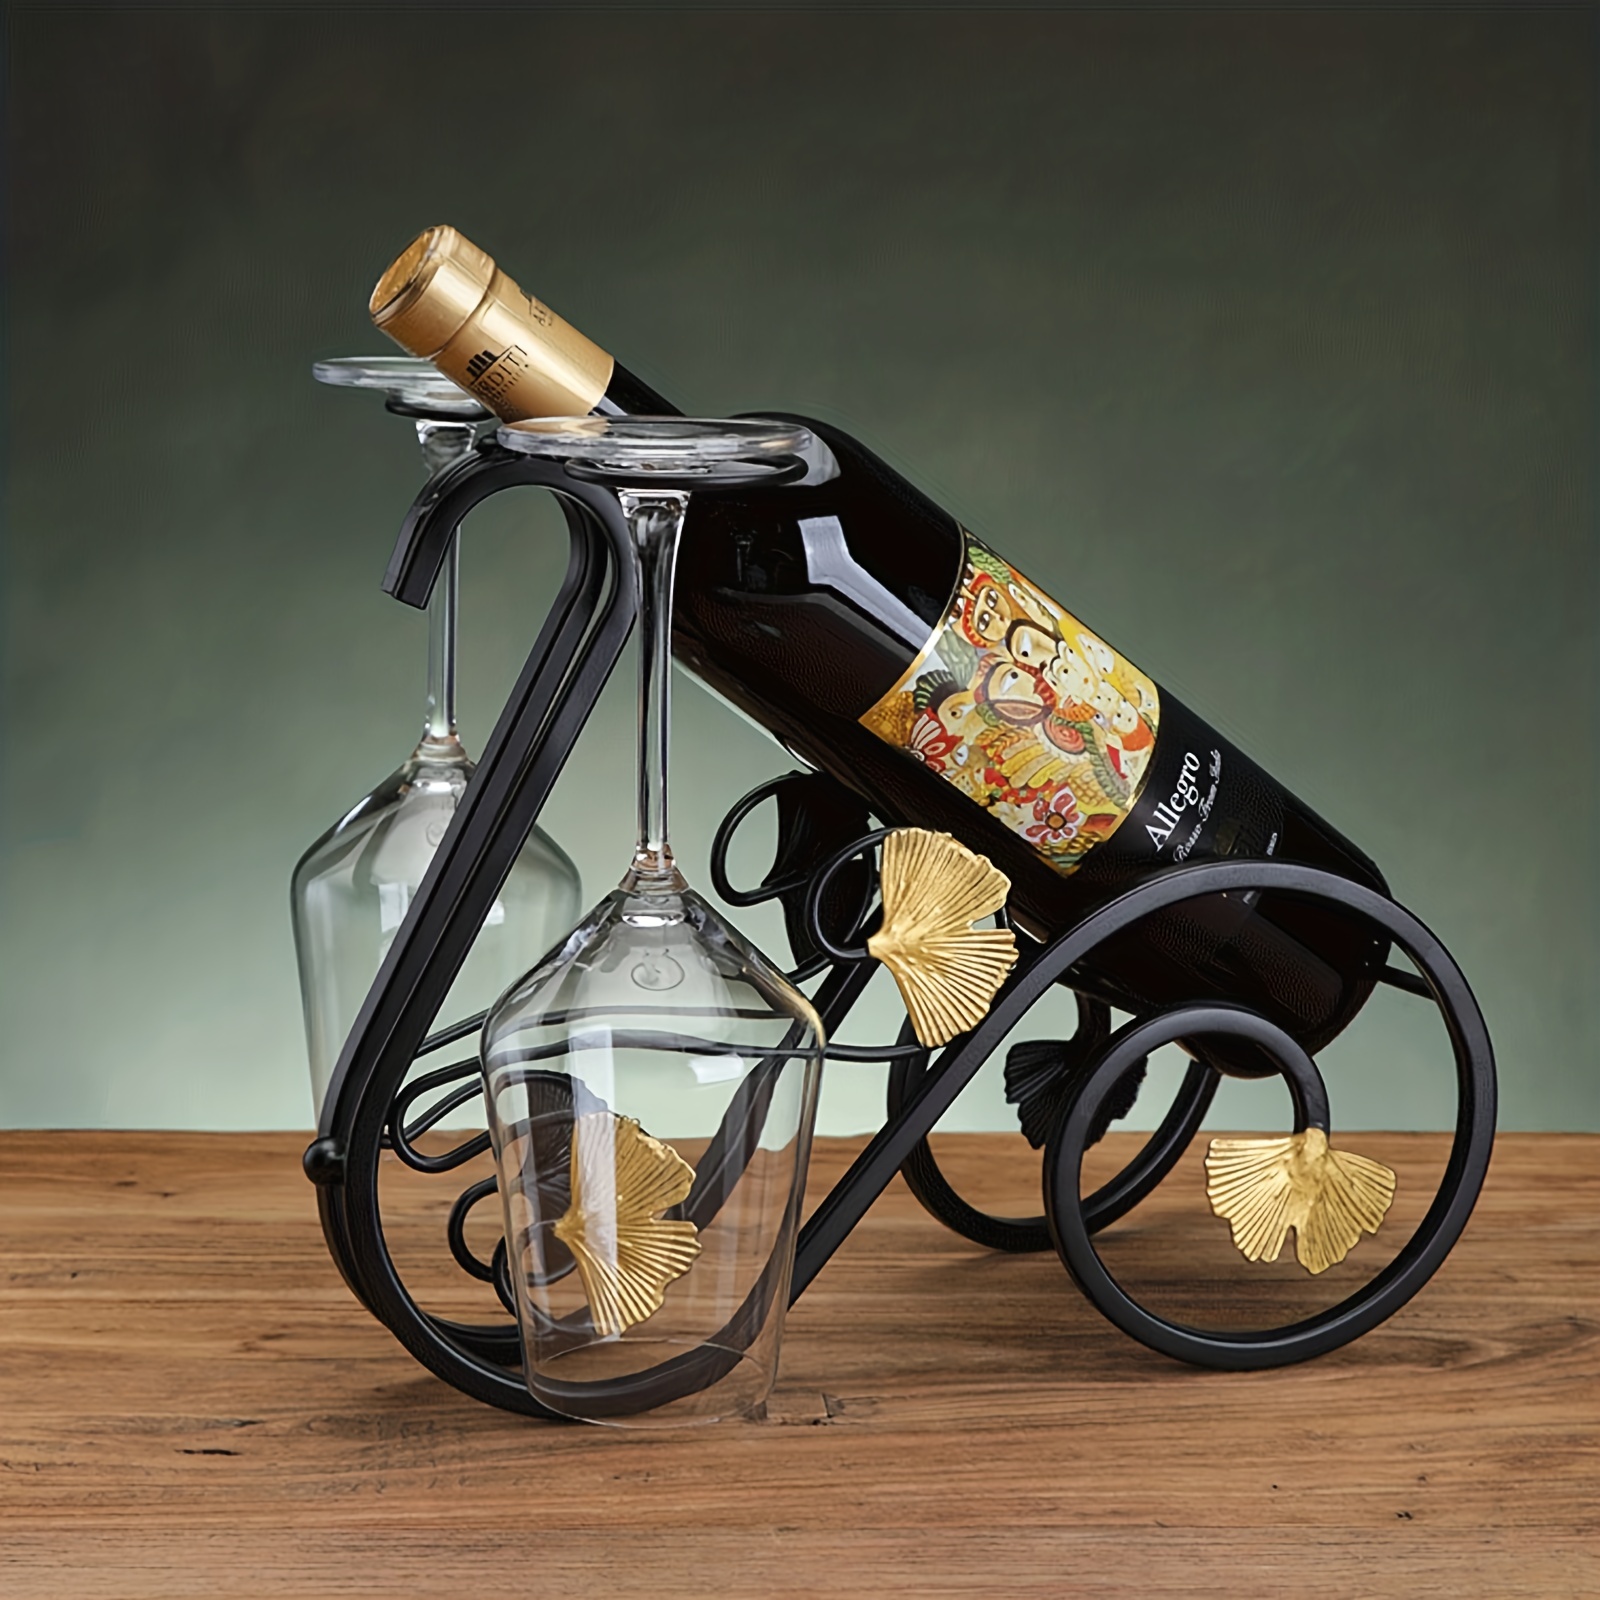 1pc Wine Bottle Holder, Tricycle Shaped Wine Rack, Holding 1 Wine Bottle  Creative Iron Golden Wine Bottle Holder Perfect For Kitchen Counter